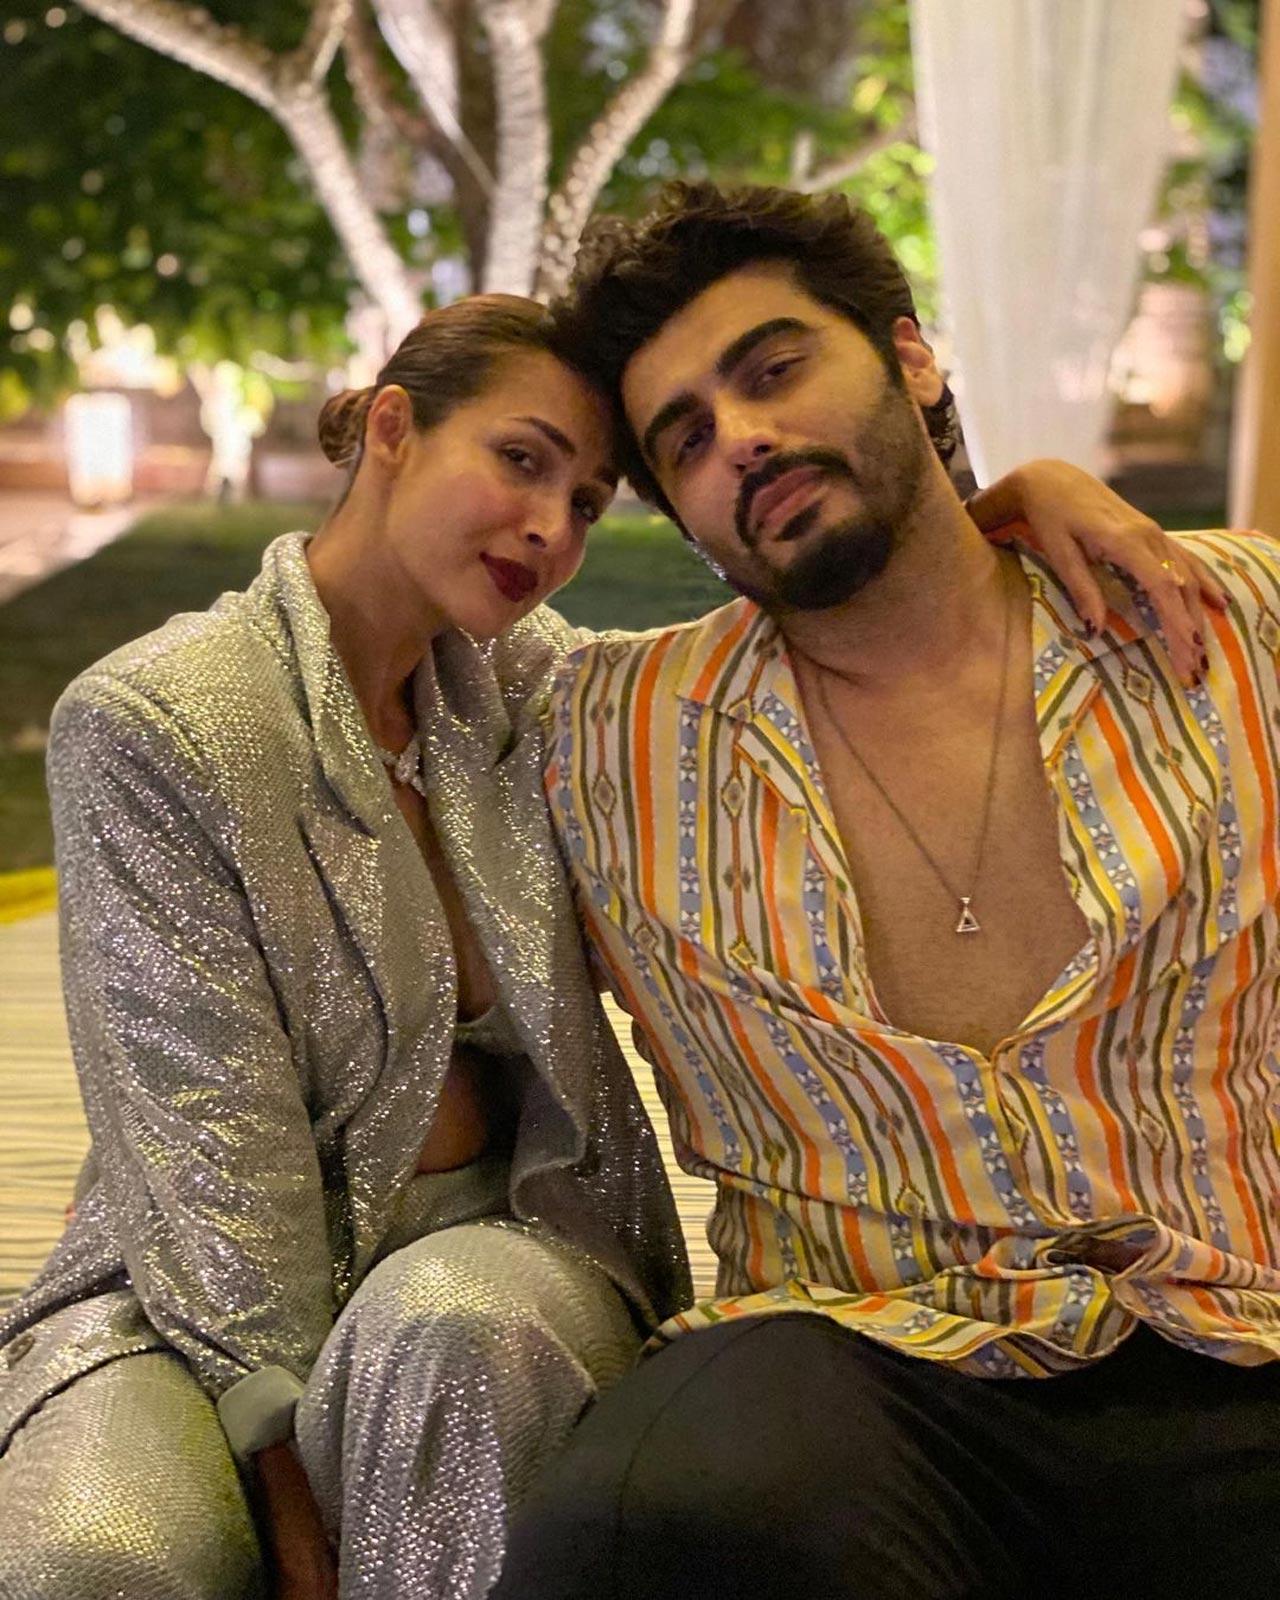 Arjun Kapoor and Malaika Arora
It's been a while since they are dating each other. Arjun and Malla made their relationship Instagram official a few years ago, and ever since then, there is no turning back for the duo. From taking vacations together to encouraging each other professionally, they are truly a power couple!